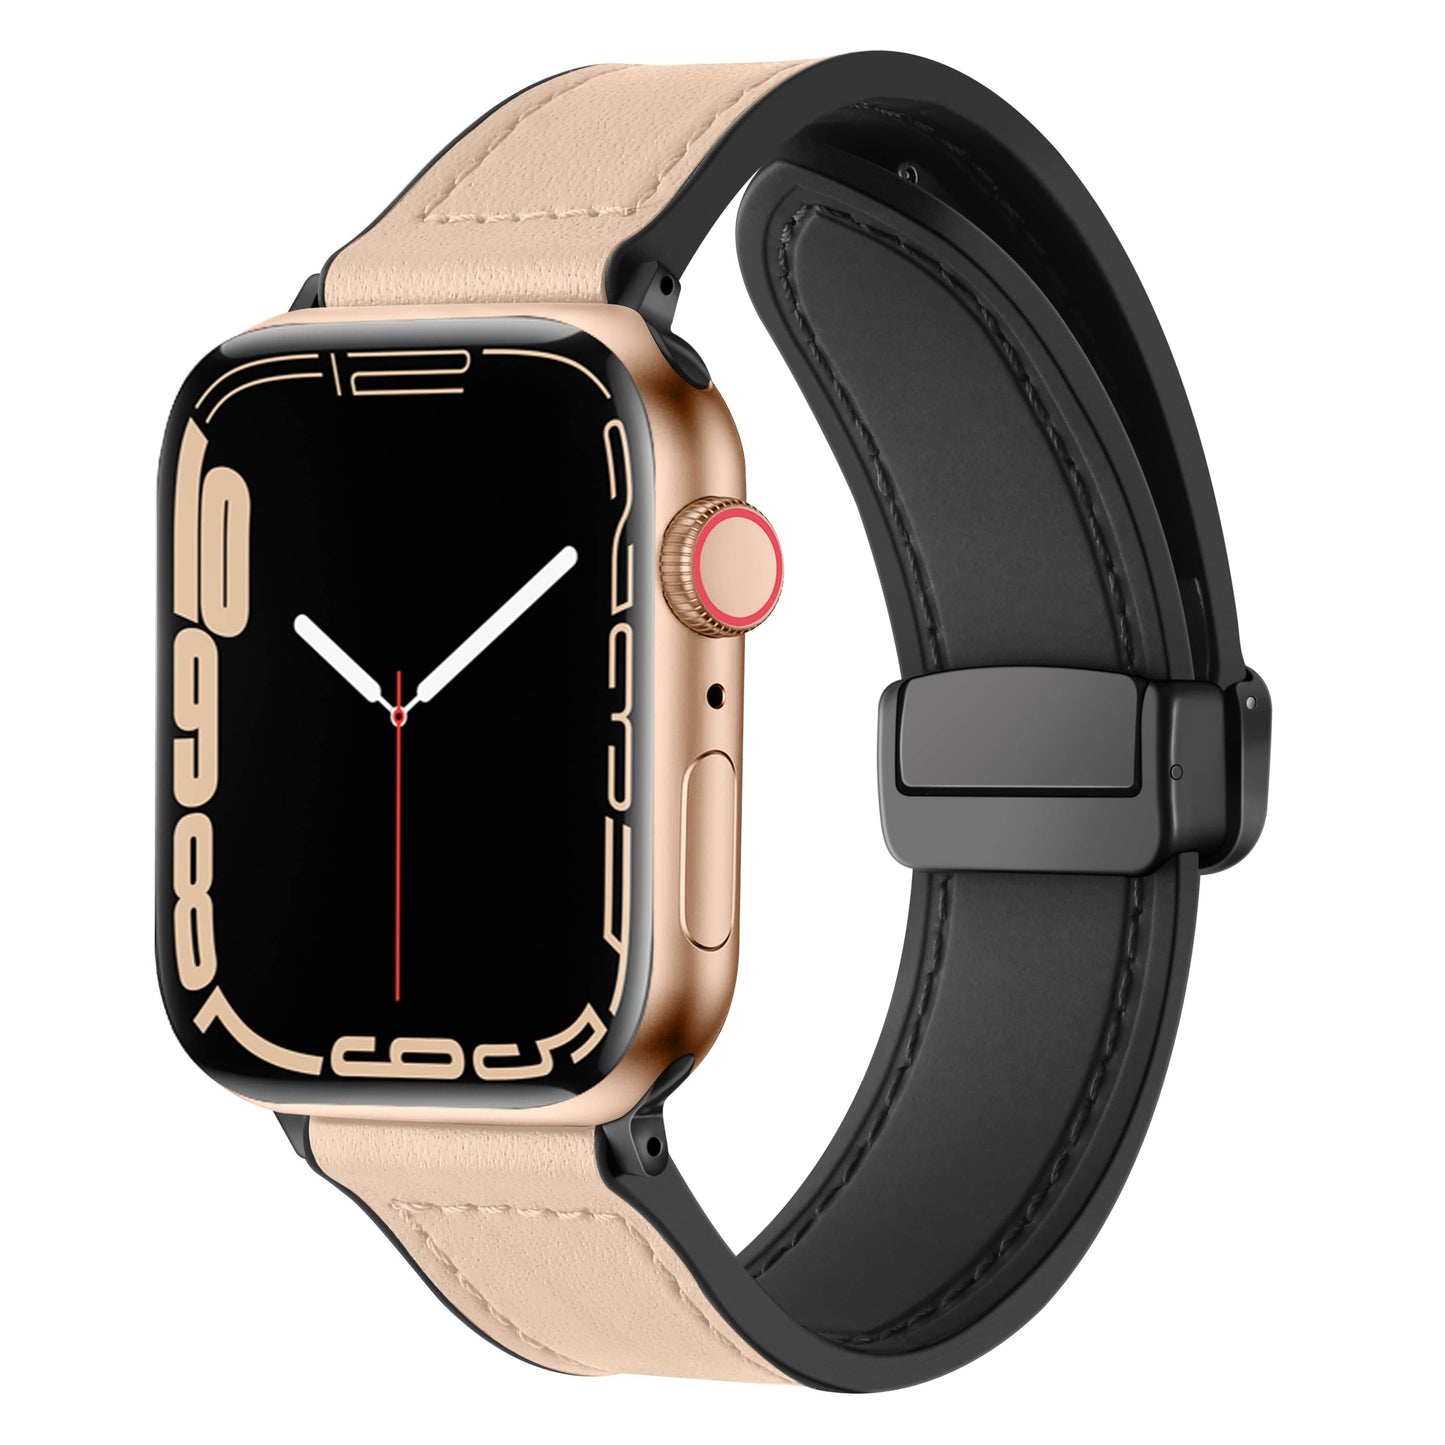 Retro Leather Band For Apple Watch with Steel Magnetic Deployant Strap